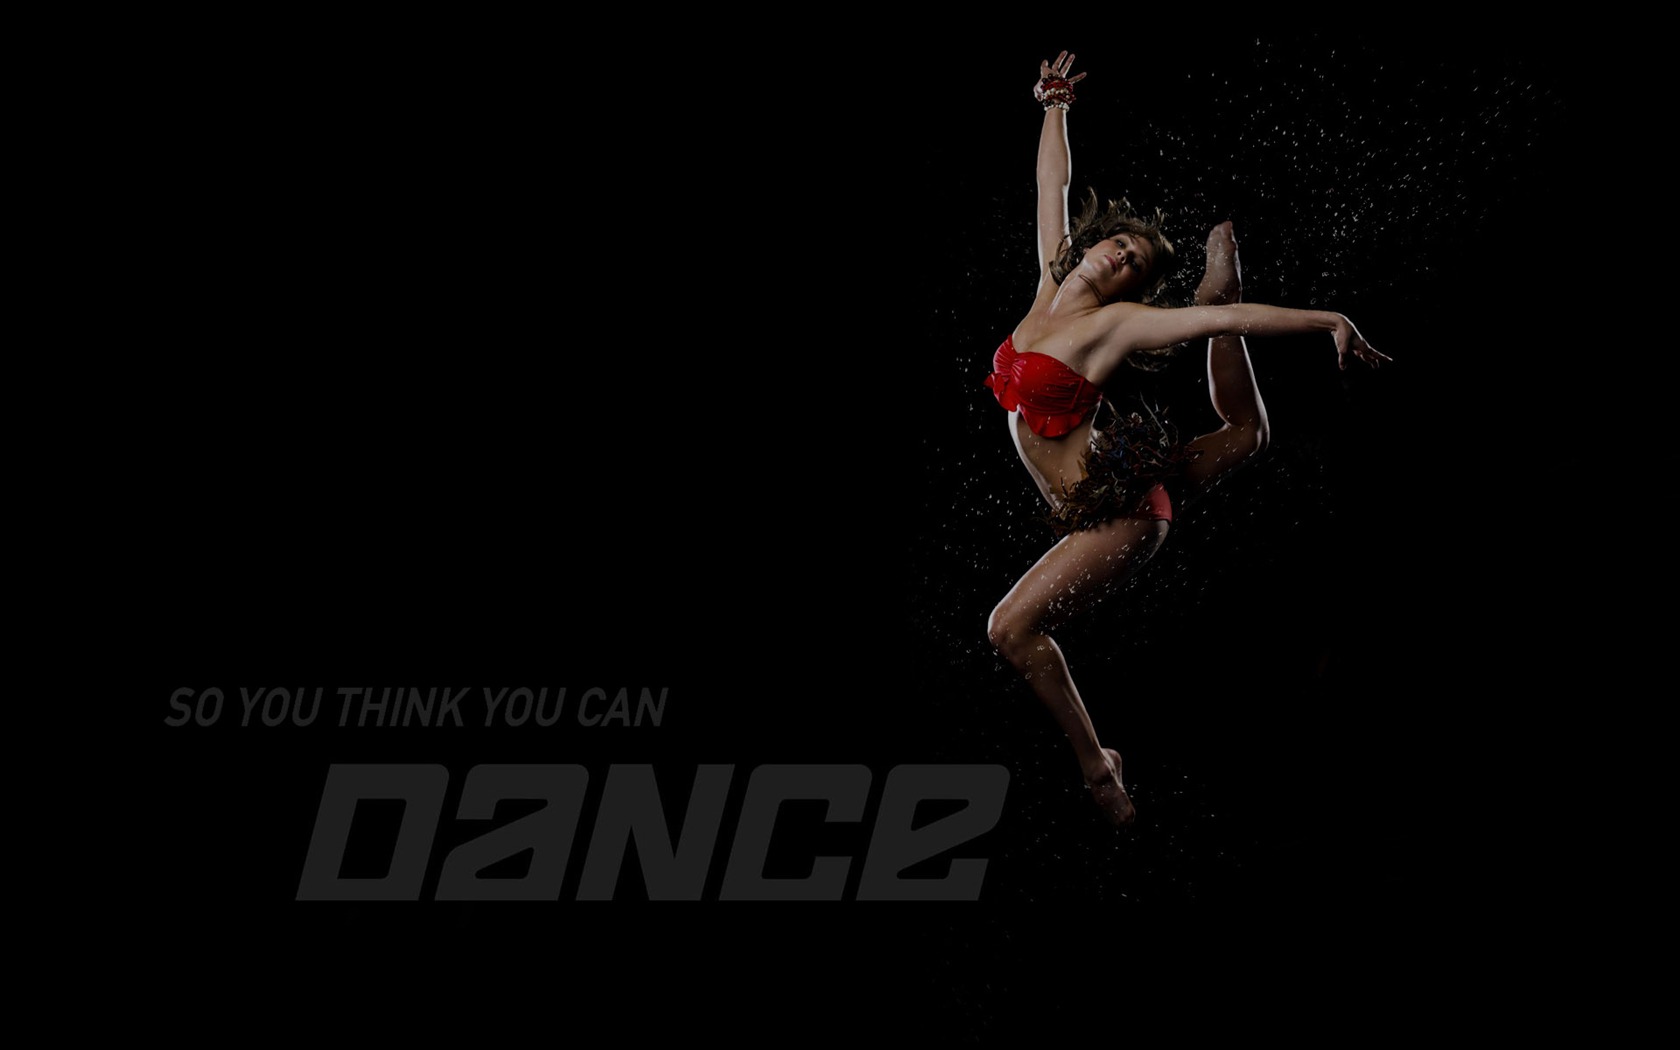 So You Think You Can Dance 舞林争霸 壁纸(二)13 - 1680x1050